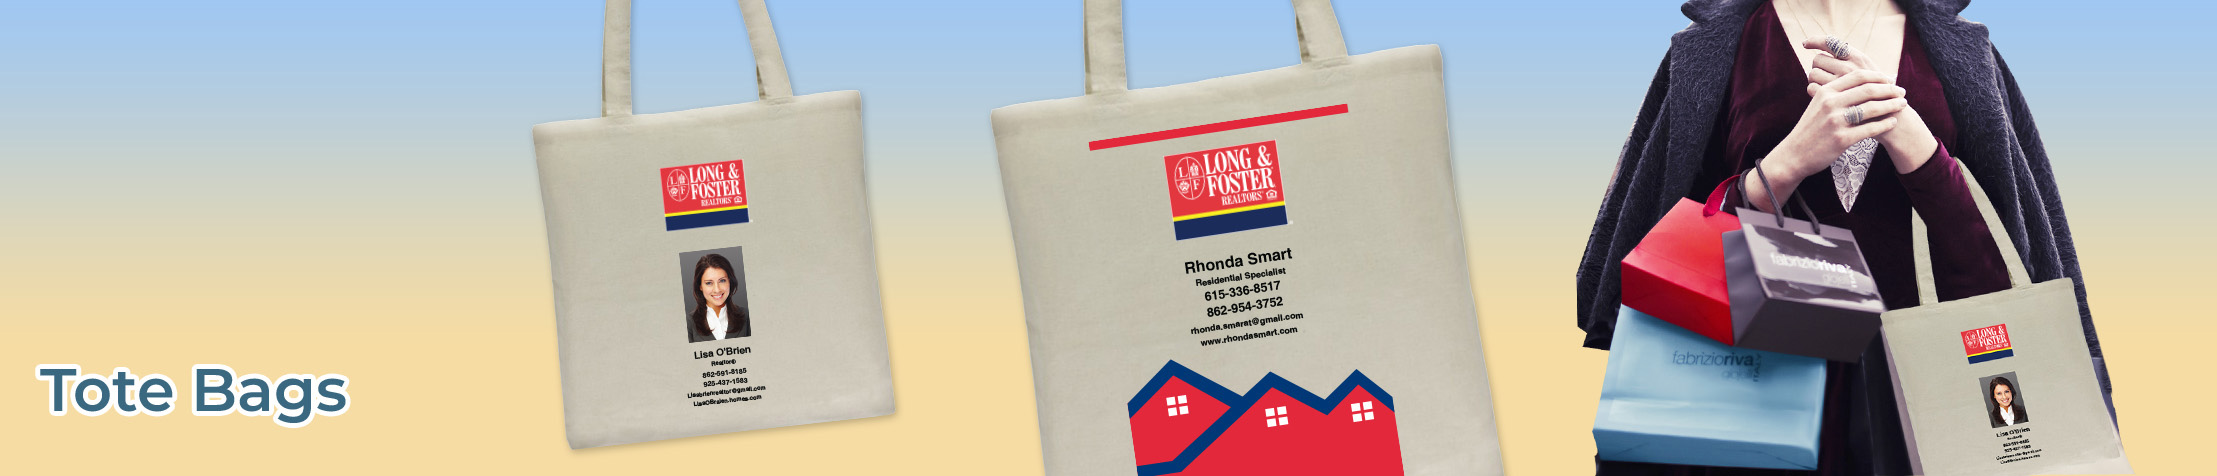 Long and Foster Real Estate Tote Bags - Long and Foster  personalized realtor promotional products | BestPrintBuy.com